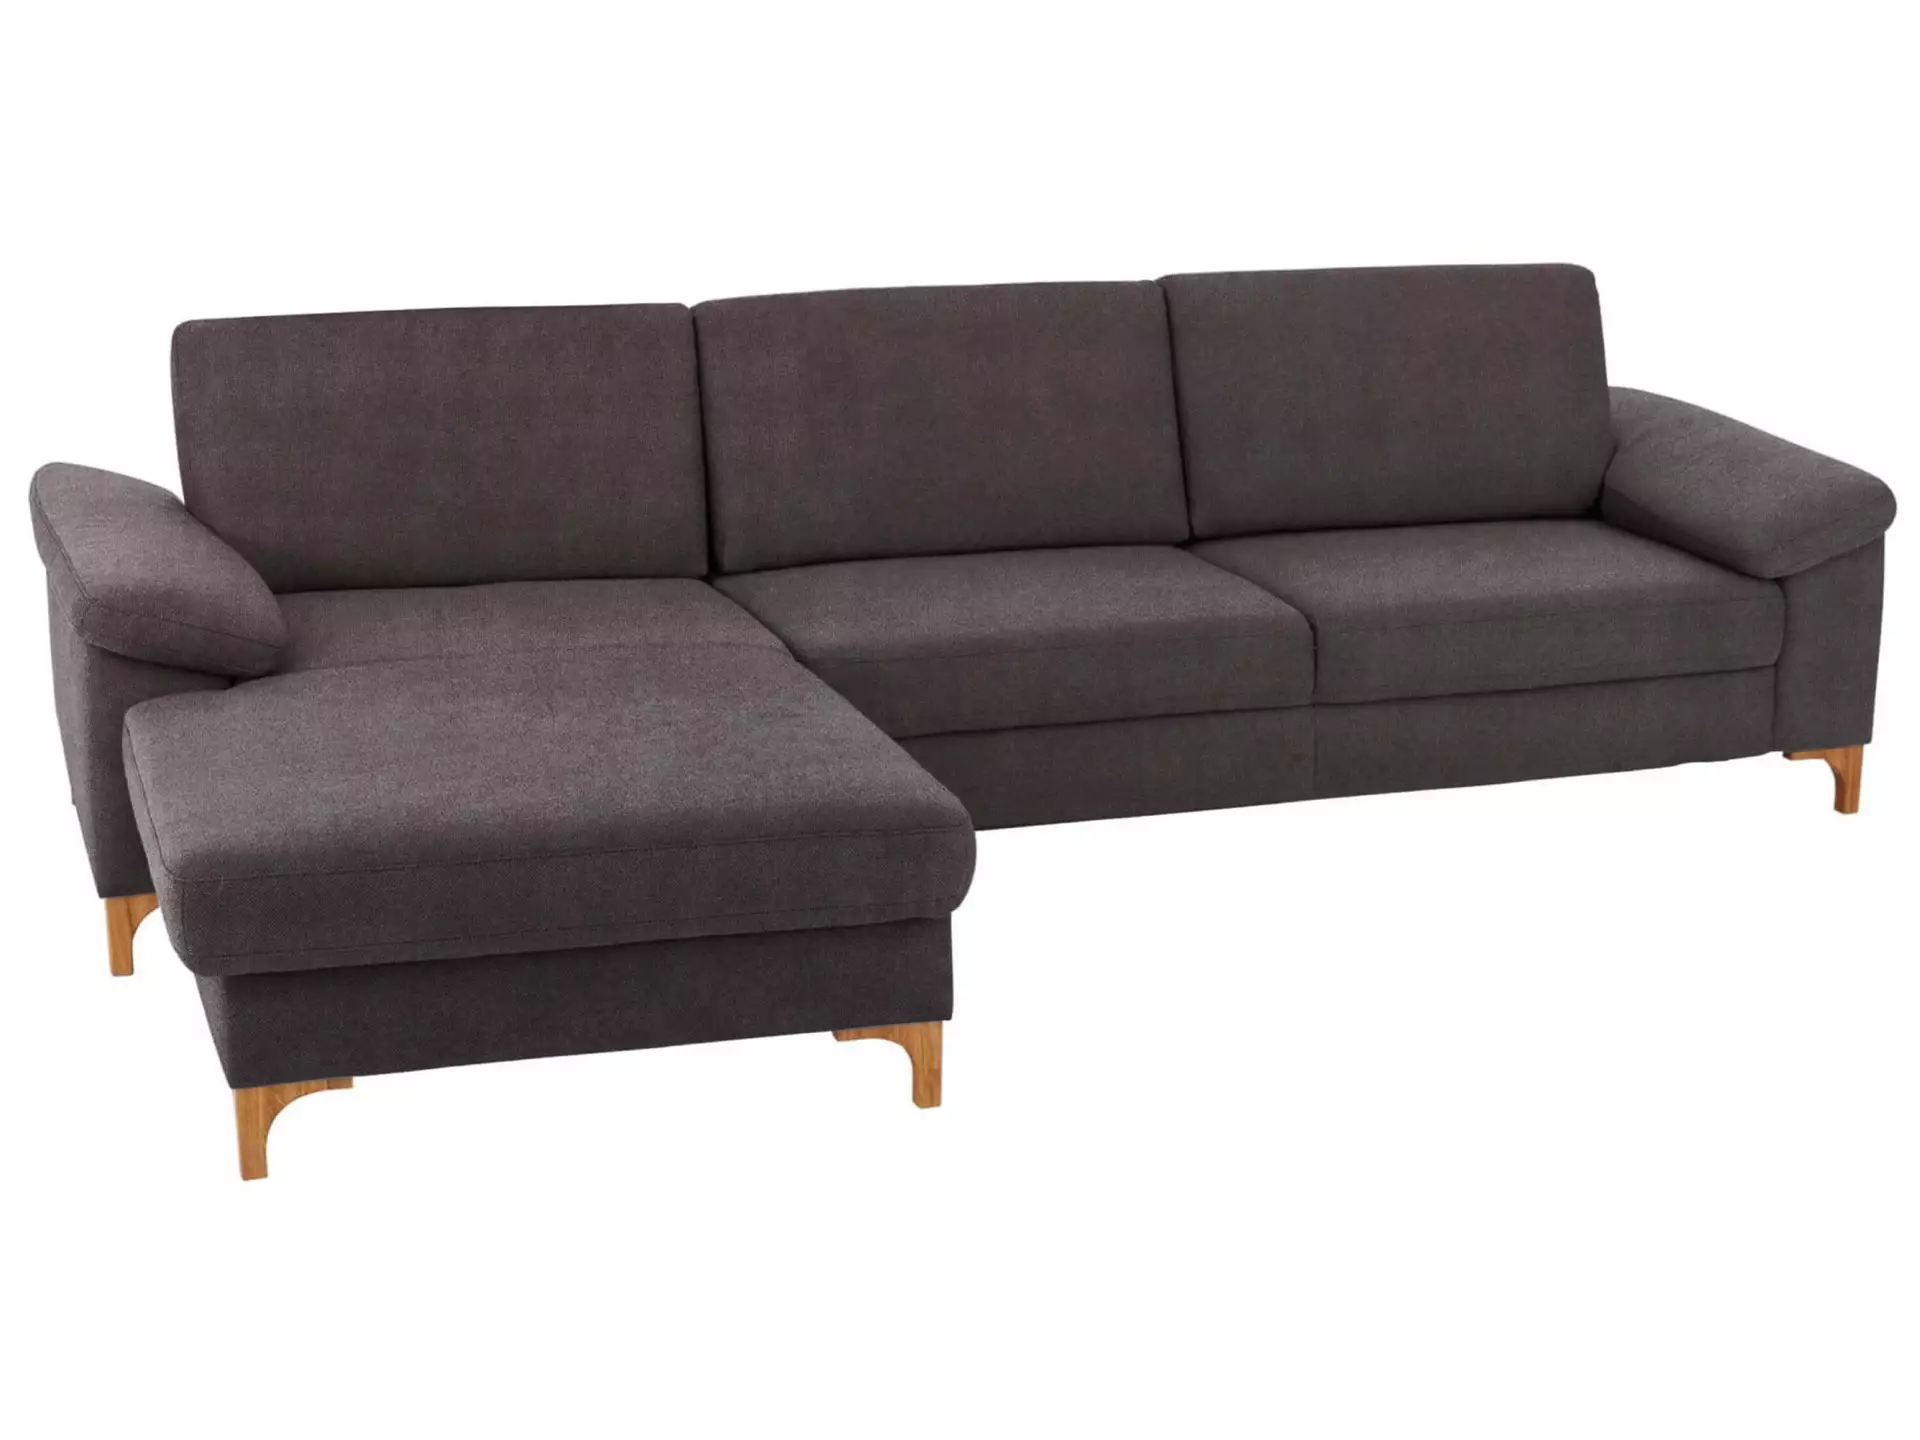 Ecksofa Coventry Basic Candy / Farbe: Steel / Material: Stoff Basic